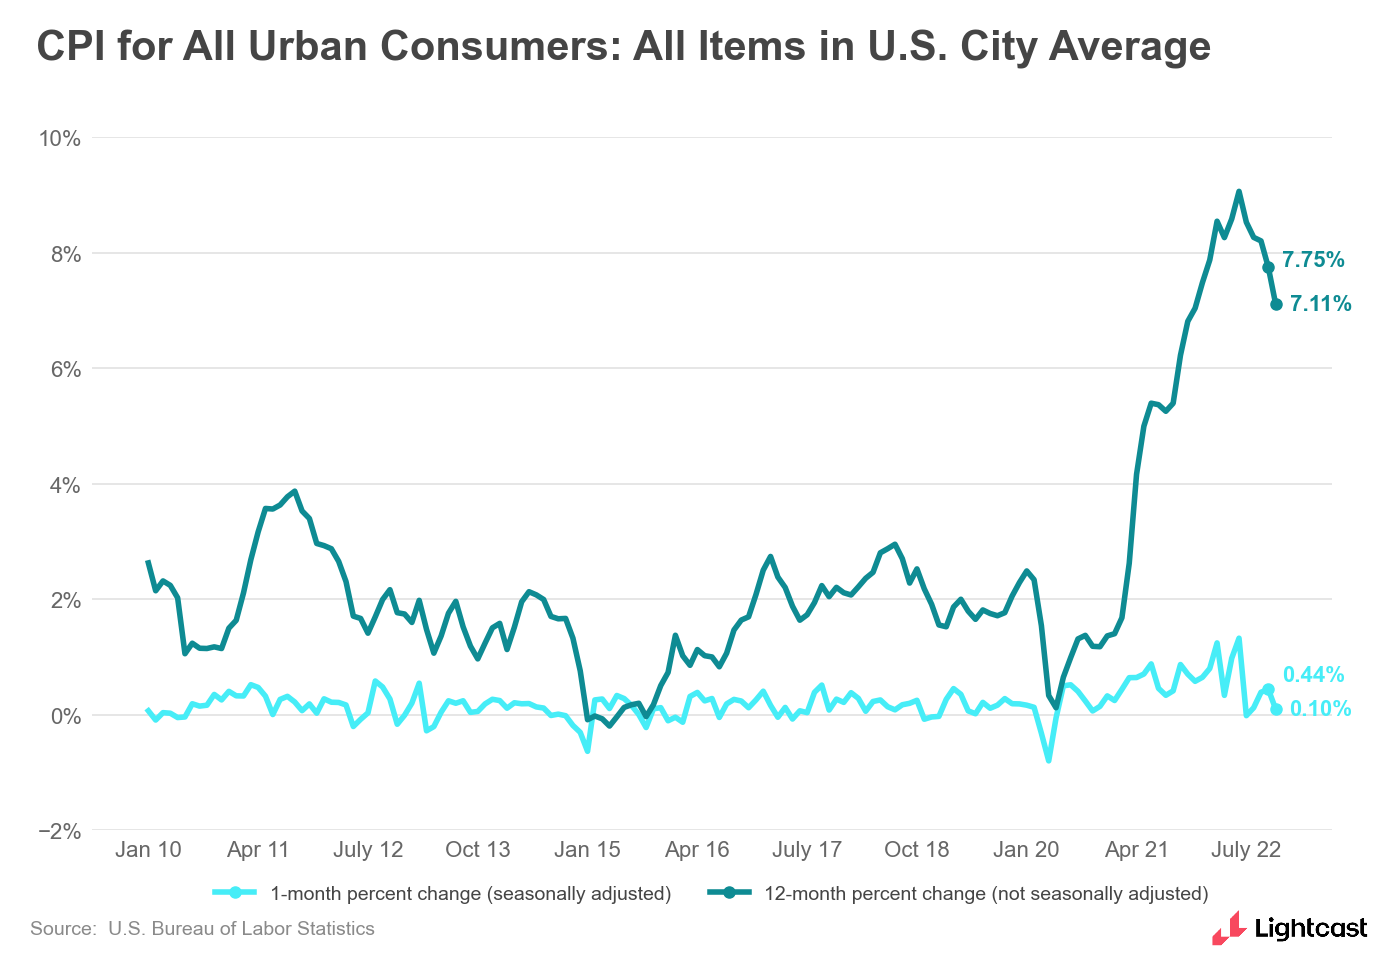 CPI for all urban consumers over time